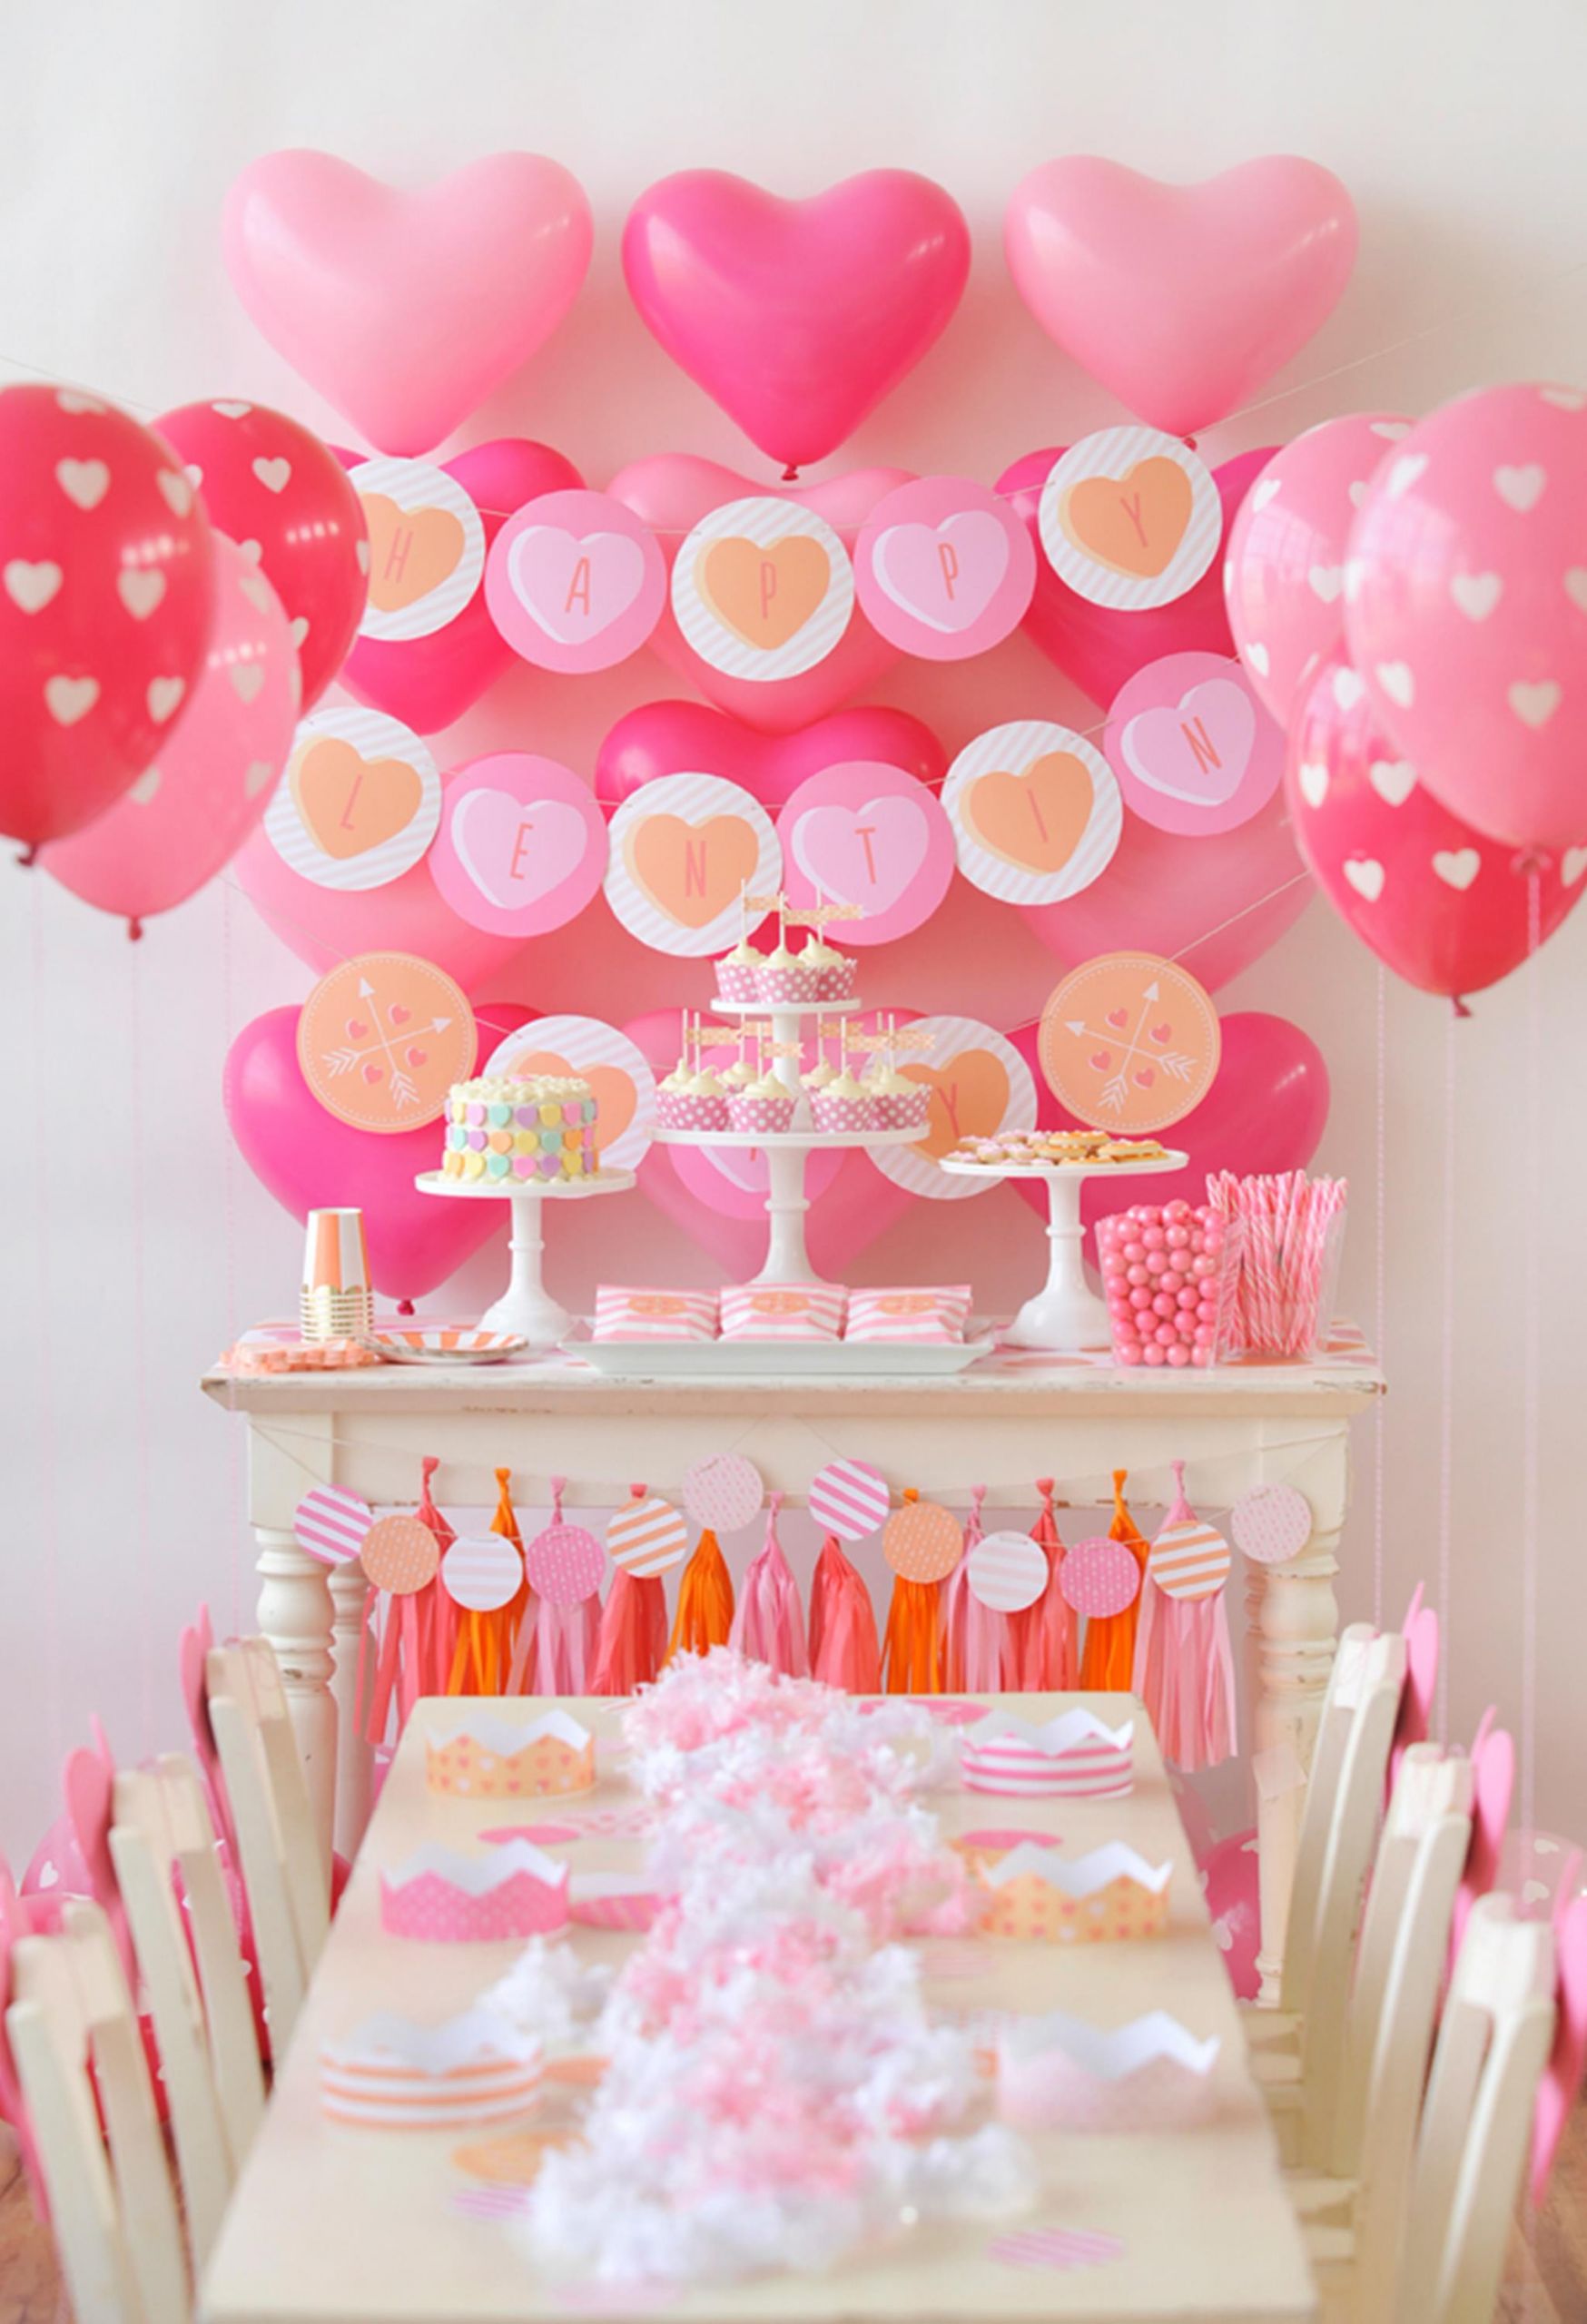 Valentines Day Party Idea Elegant Roses are Red Violets are Blue We Love This Party and